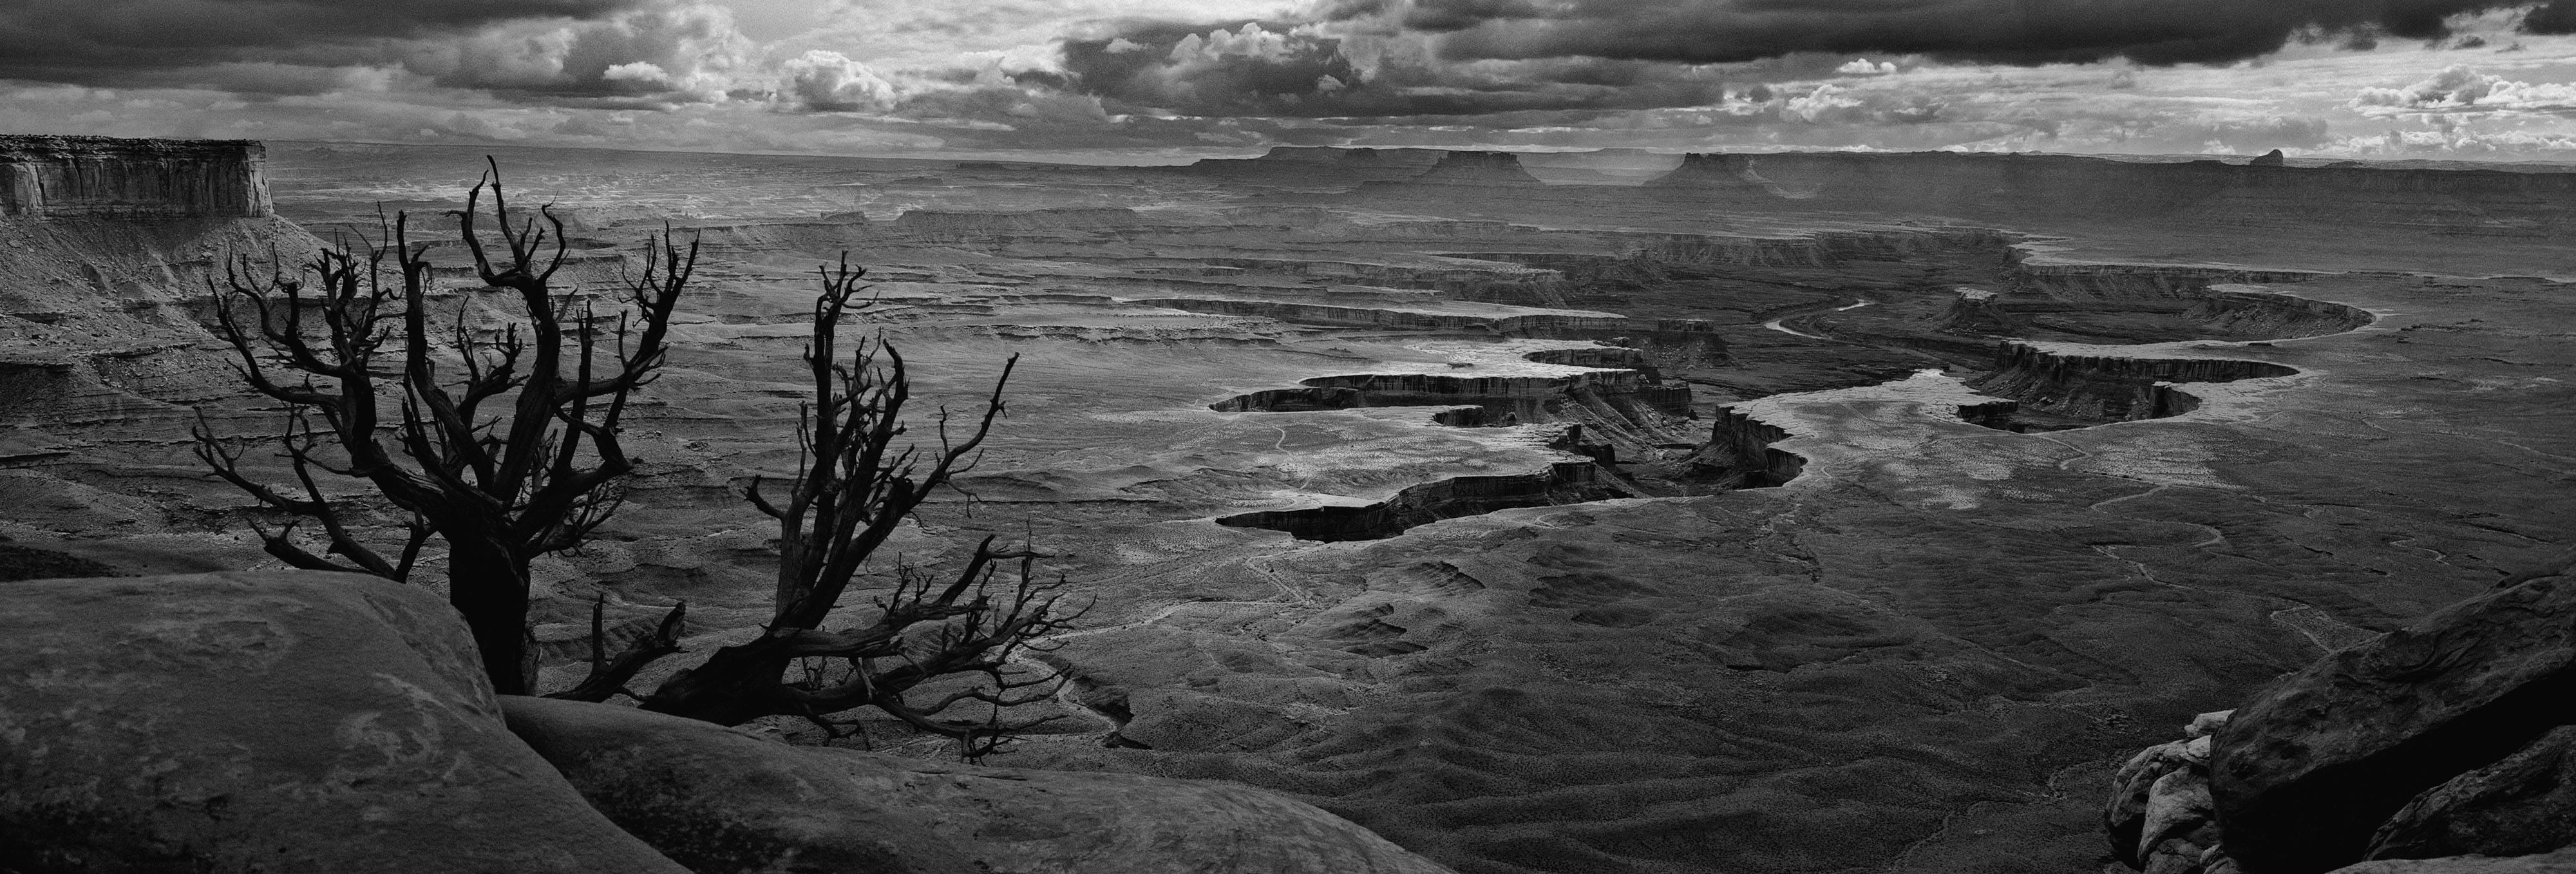 Panoramic Landscape B&W Photography: 'Canyonlands'